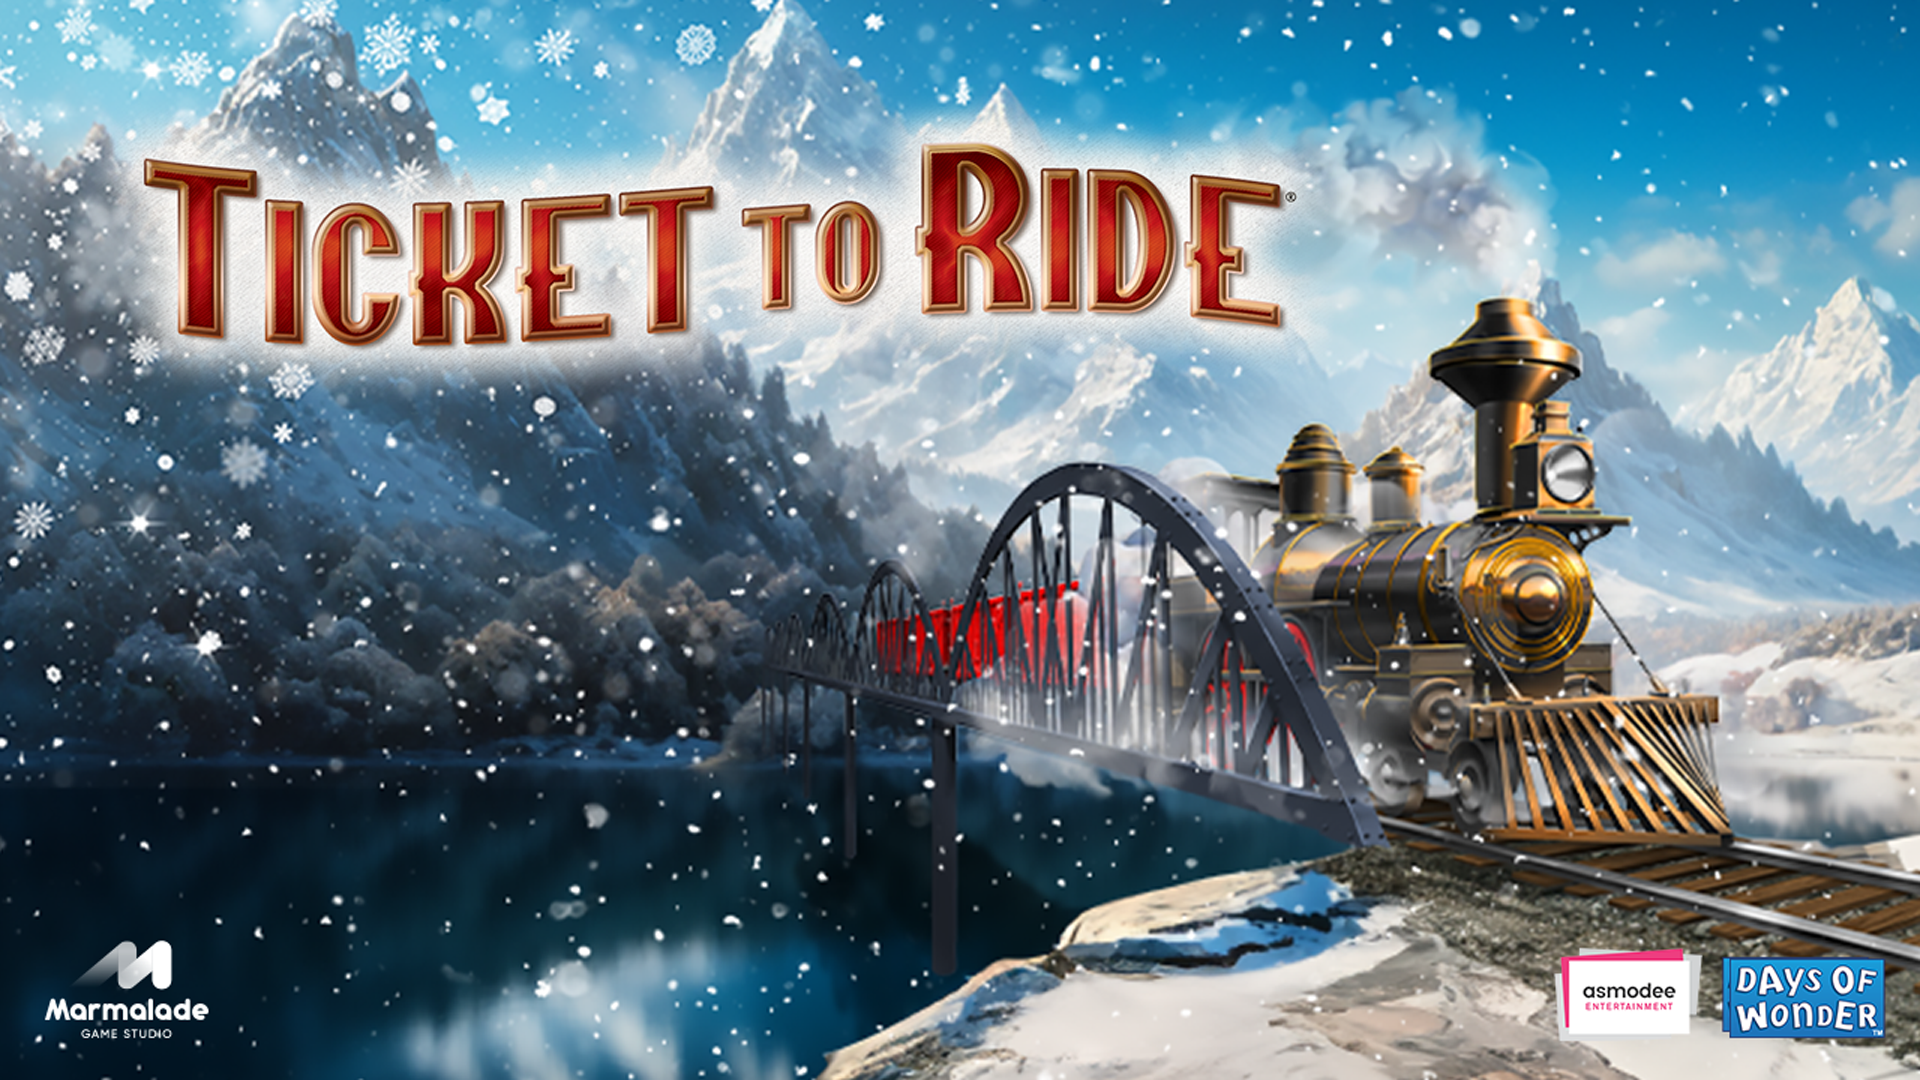 Embark on a Global Adventure: Ticket to Ride Launches on Mobile